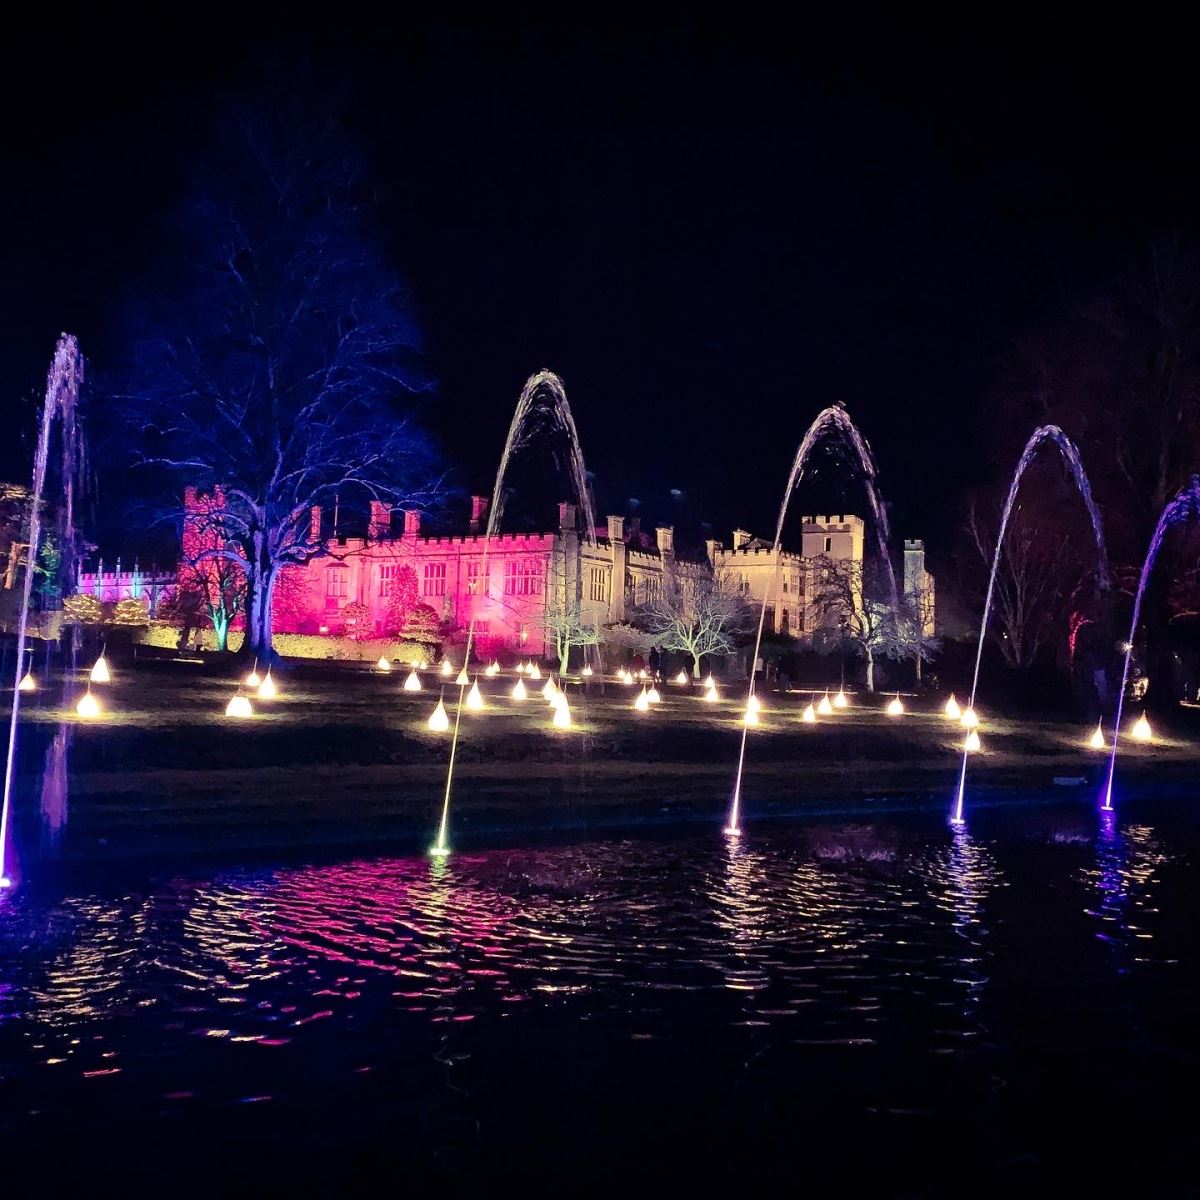 Fountain illuminated in front of Sudeley Castle